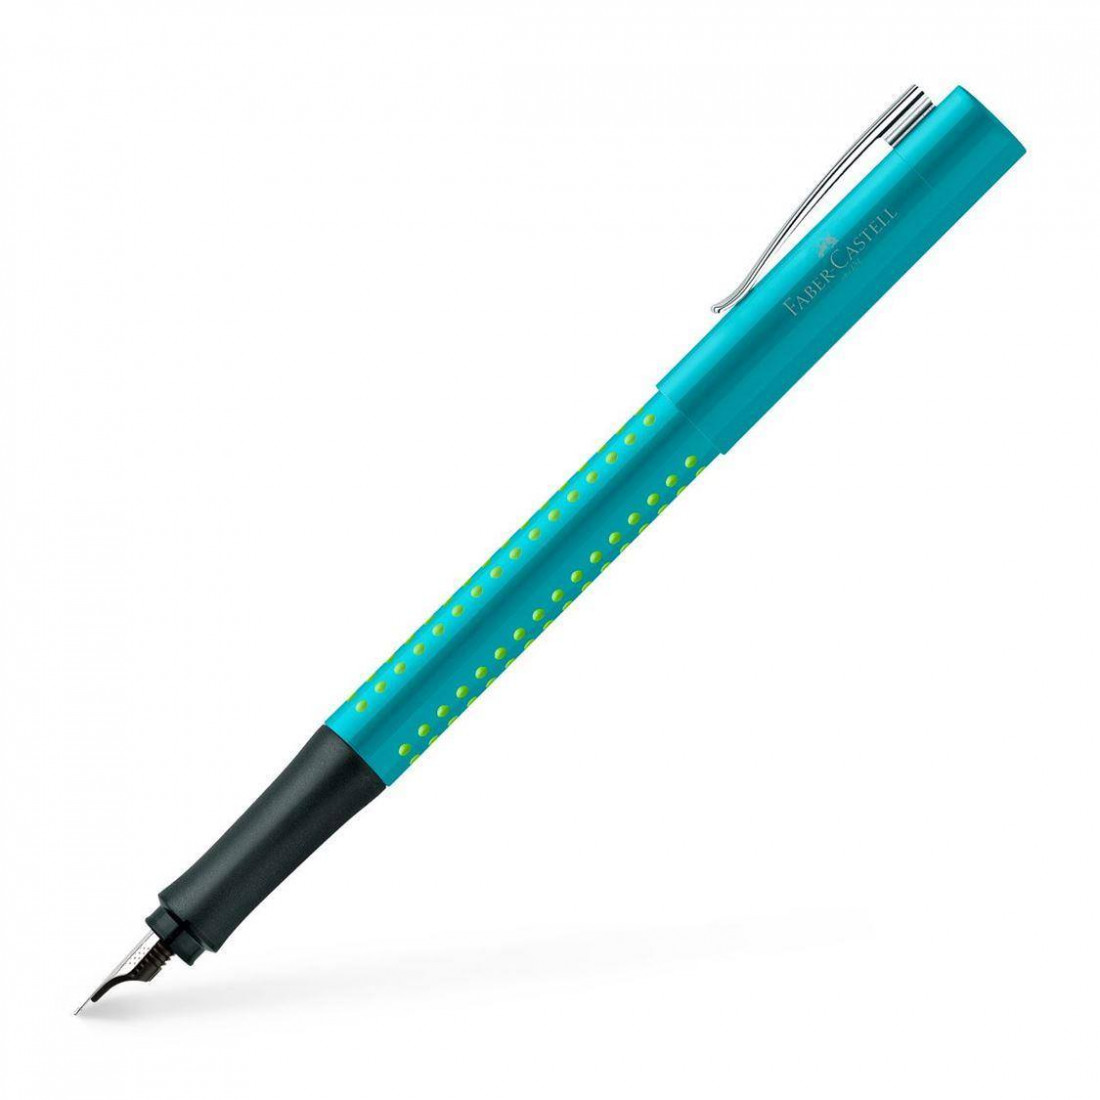 Faber Castell Fountain pen Grip 2010 turquoise